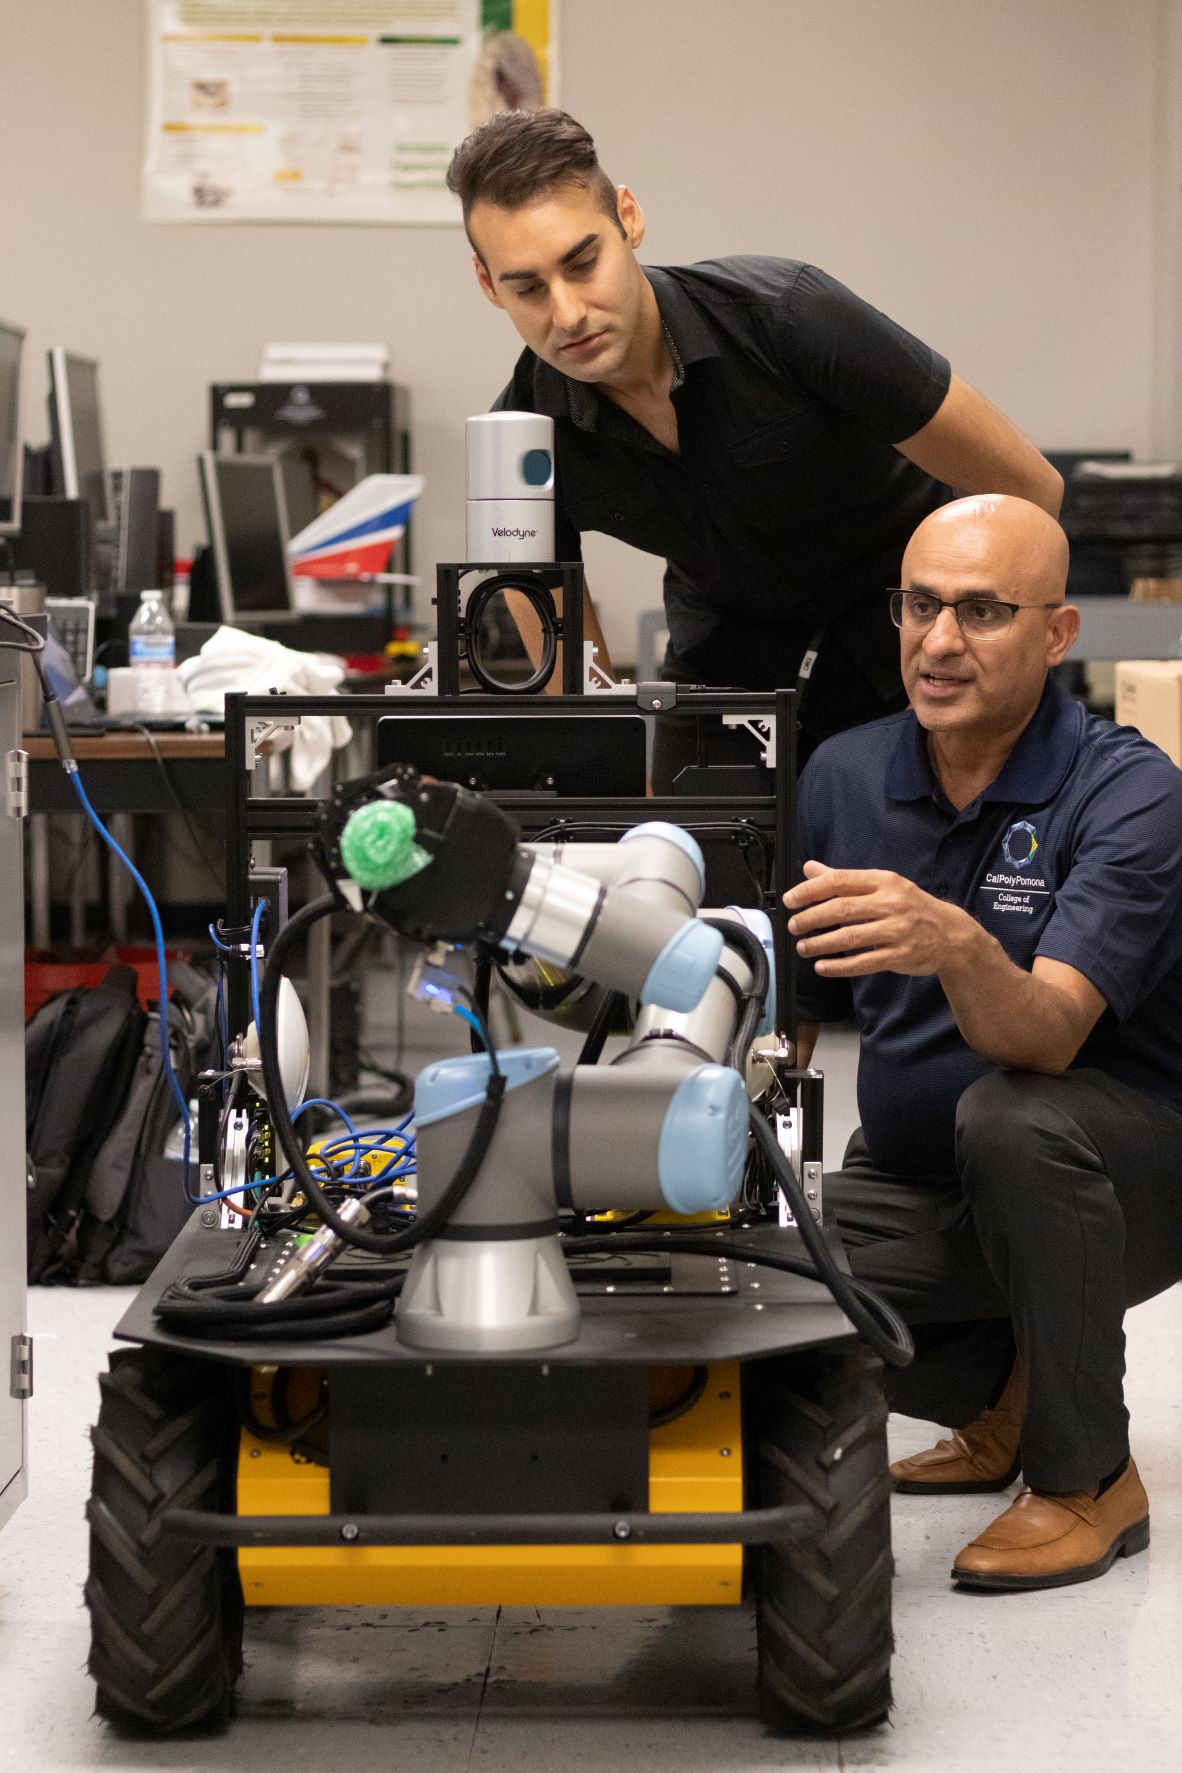 Professor Subodh Bhandari instructs an engineering student on using an unmanned ground vehicle.